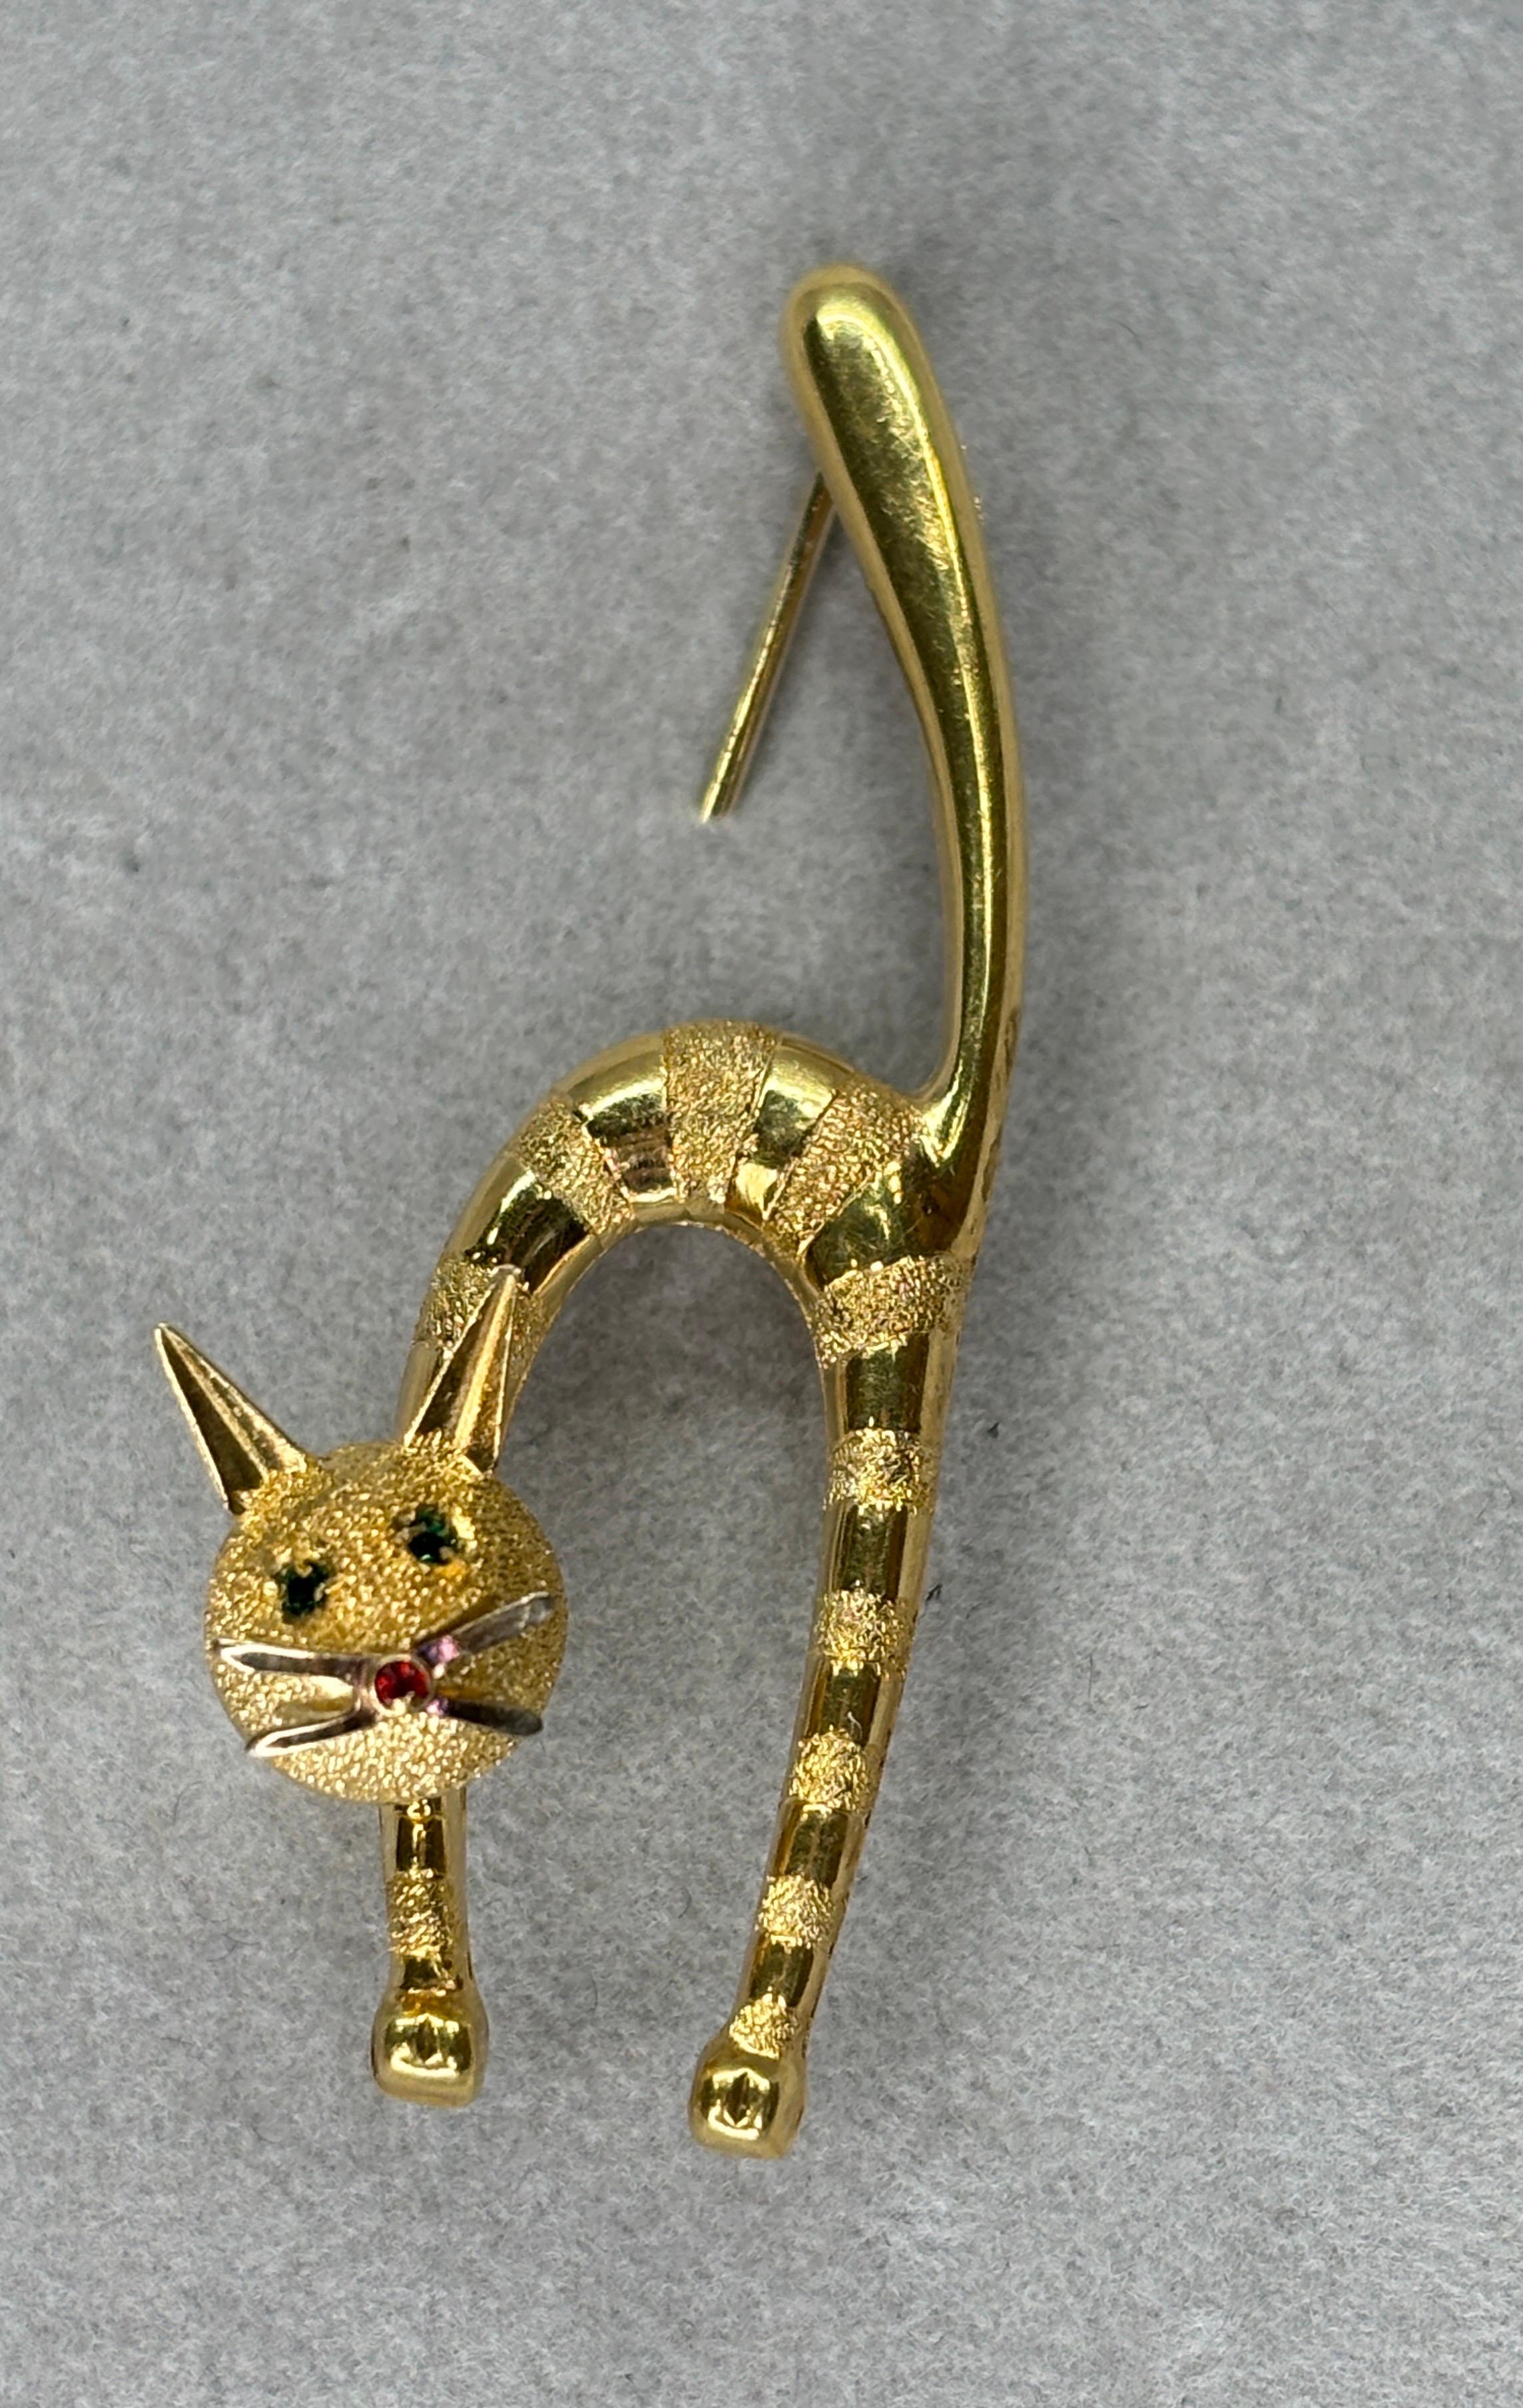 This cat figure crafted in 18k yellow gold captures a funny, playful, pouncing stance. The craftsmanship involves meticulous detailing to bring out the texture of the cat’s fur, the delicacy of its paws, or even the whimsical curl of its tail.  The